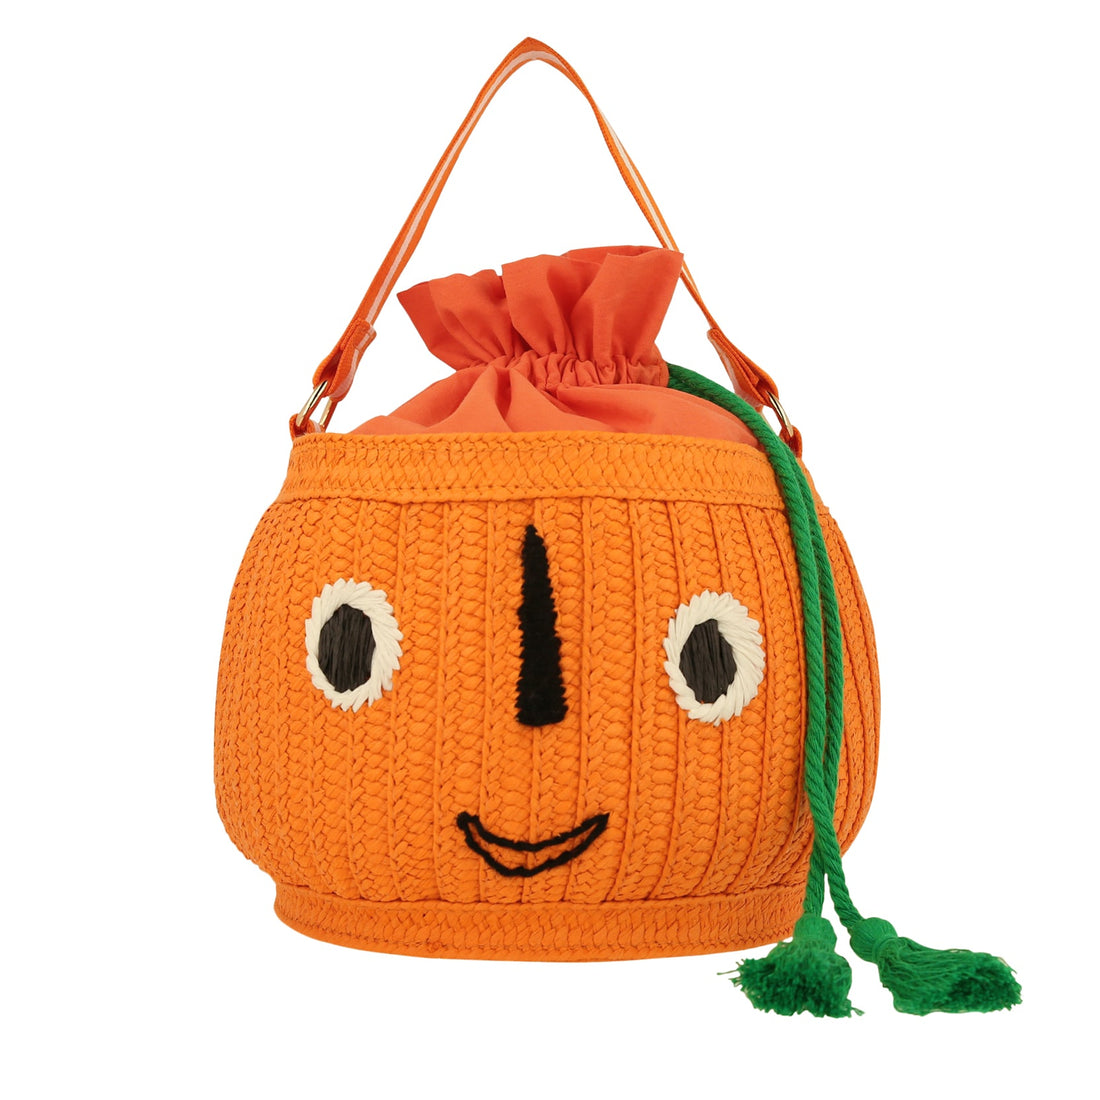 Orange woven bag with pumpkin face stitched on front 